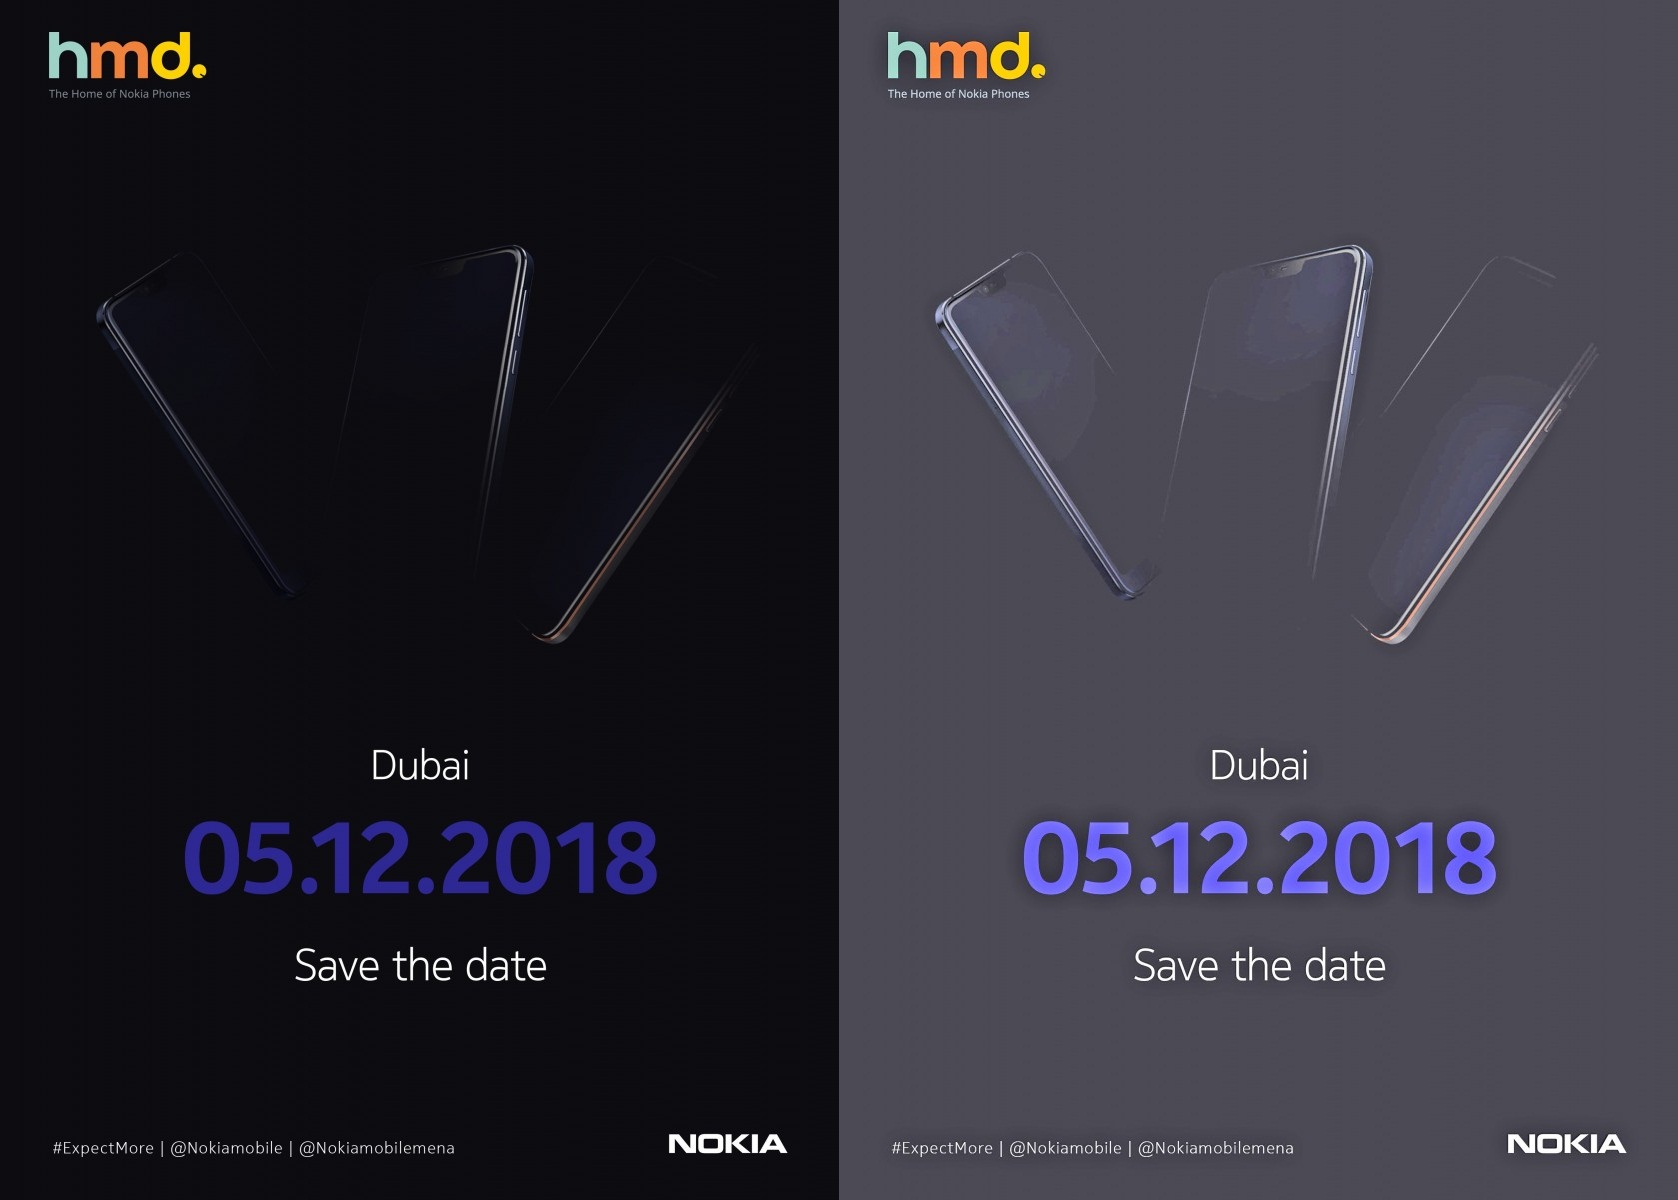 HMD event on December 5 to bring as many as 3 new Nokia models